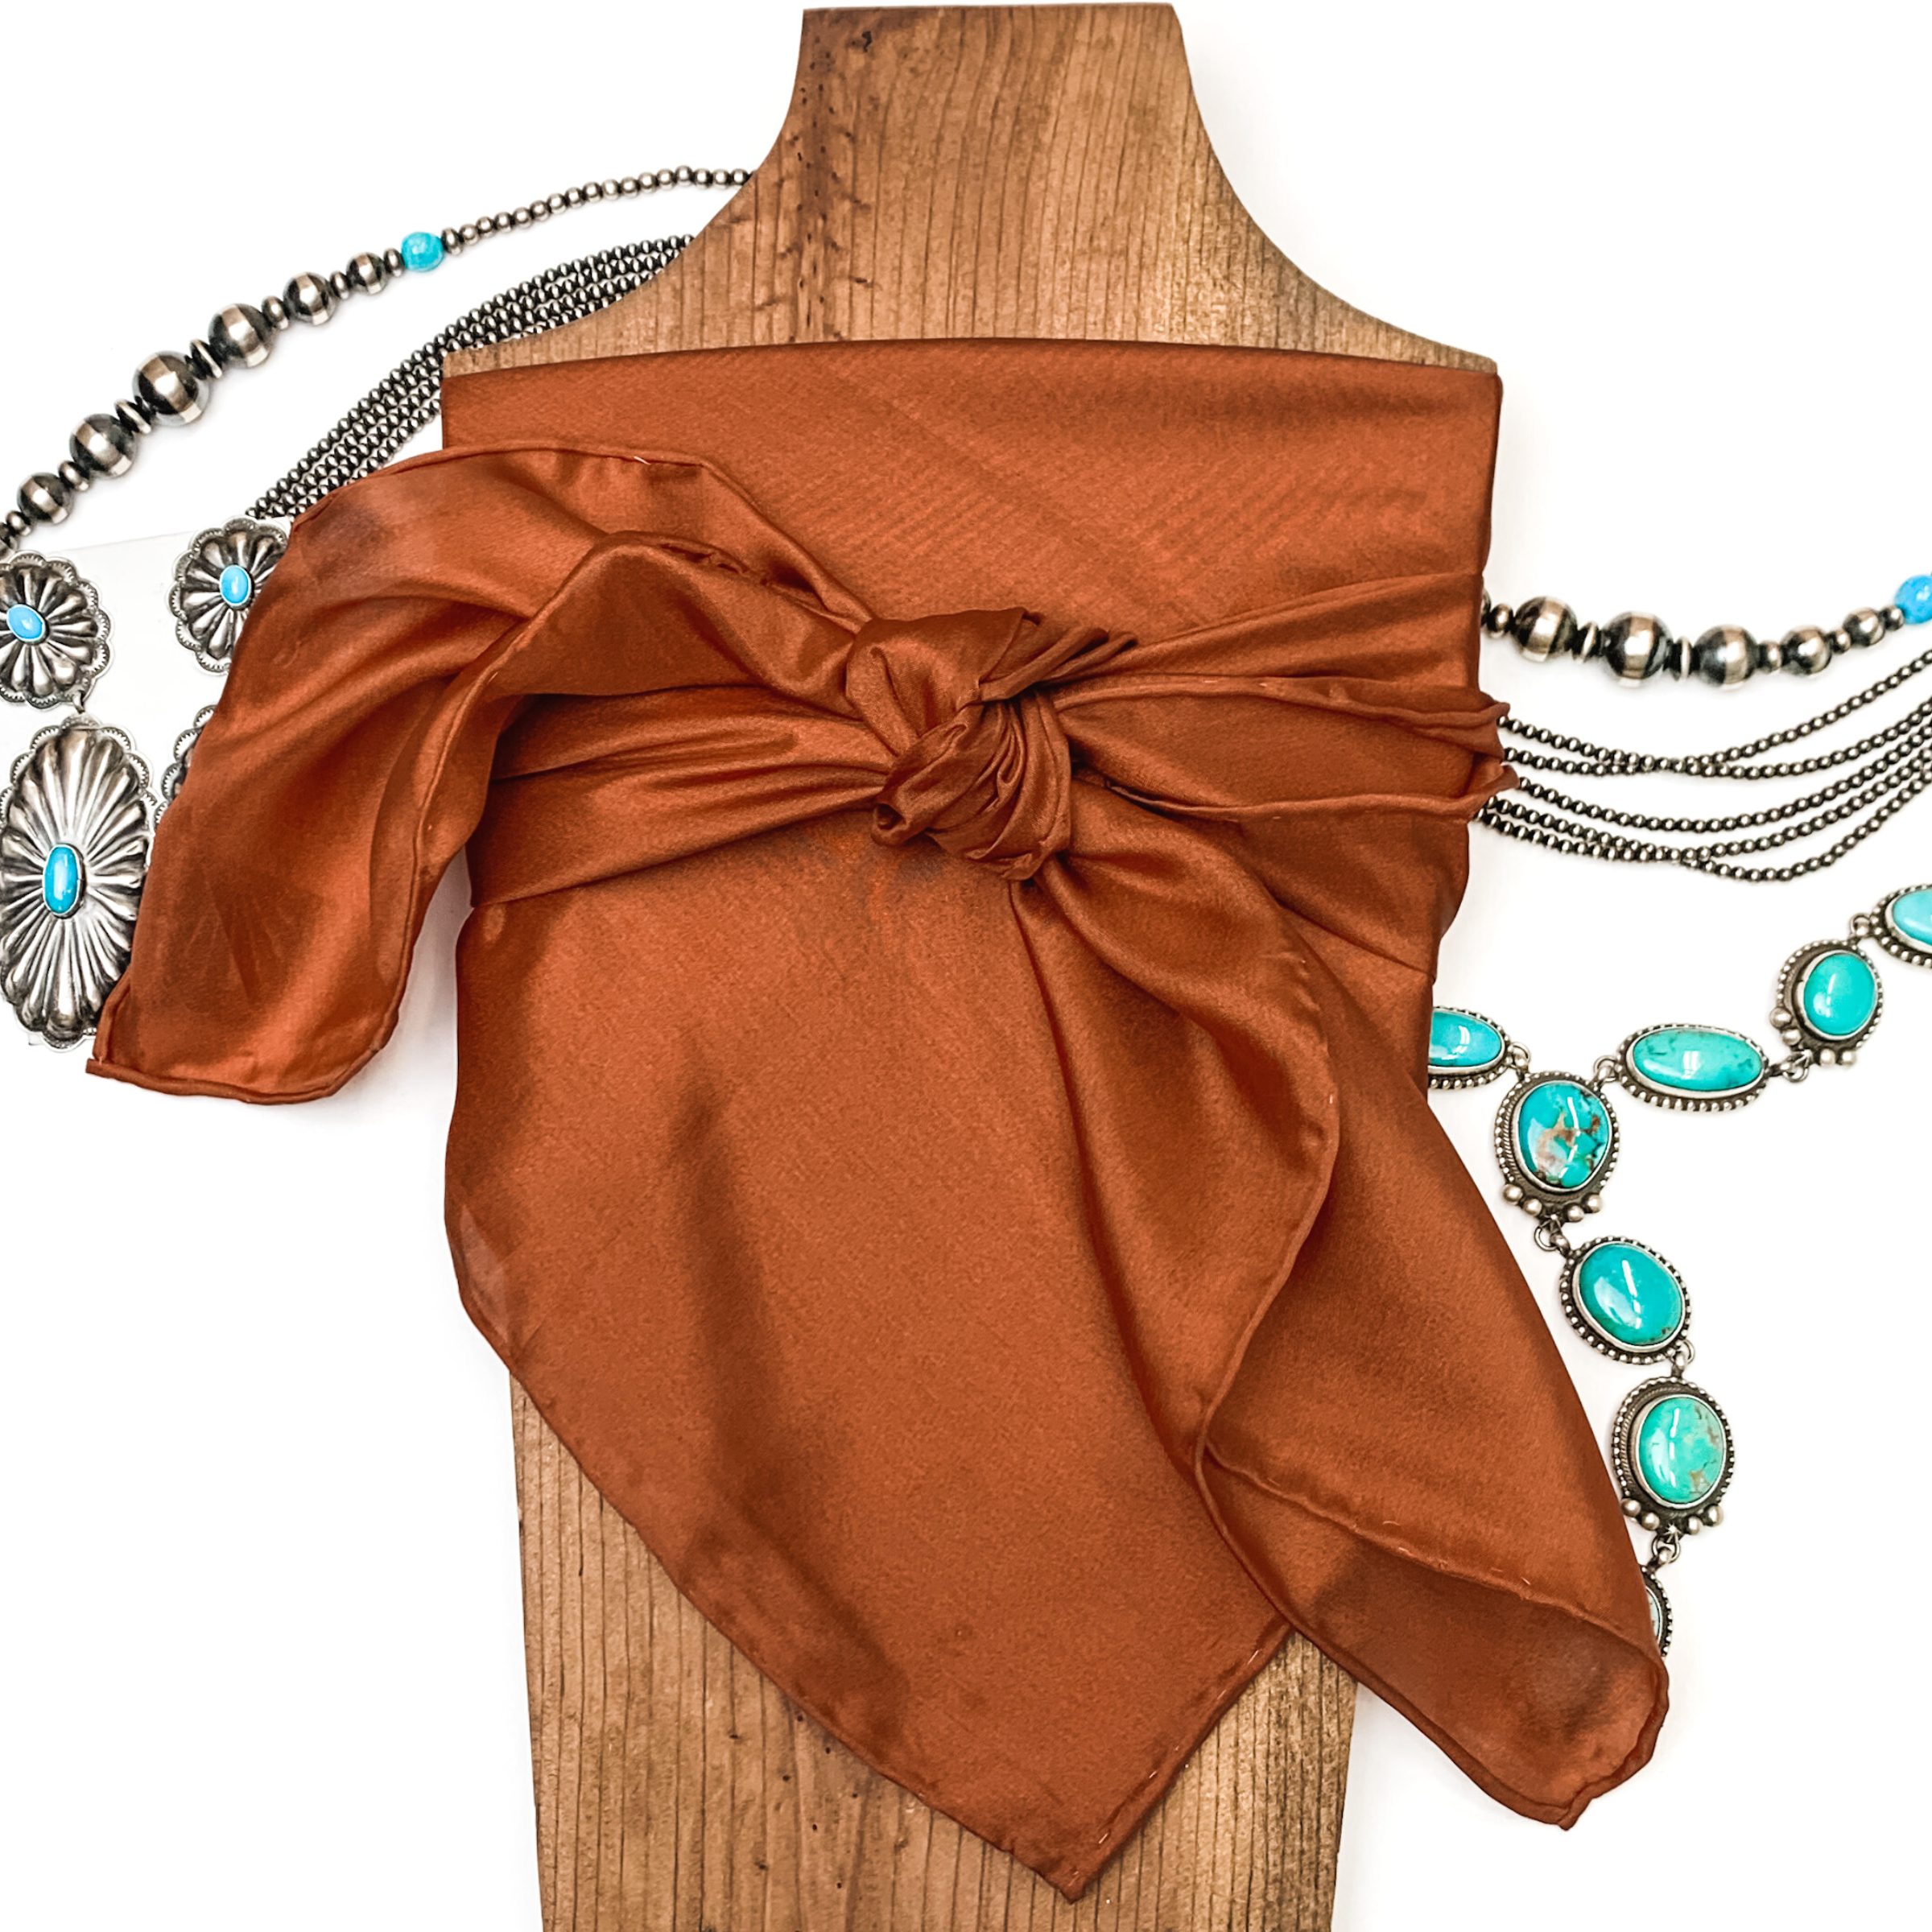 This is a copper silk wild rag, this wild rag is pictured wrapped around a brown necklace board. This wild rag is pictured on a white background and with silver and turquoise Navajo jewelry behind it as decoration.